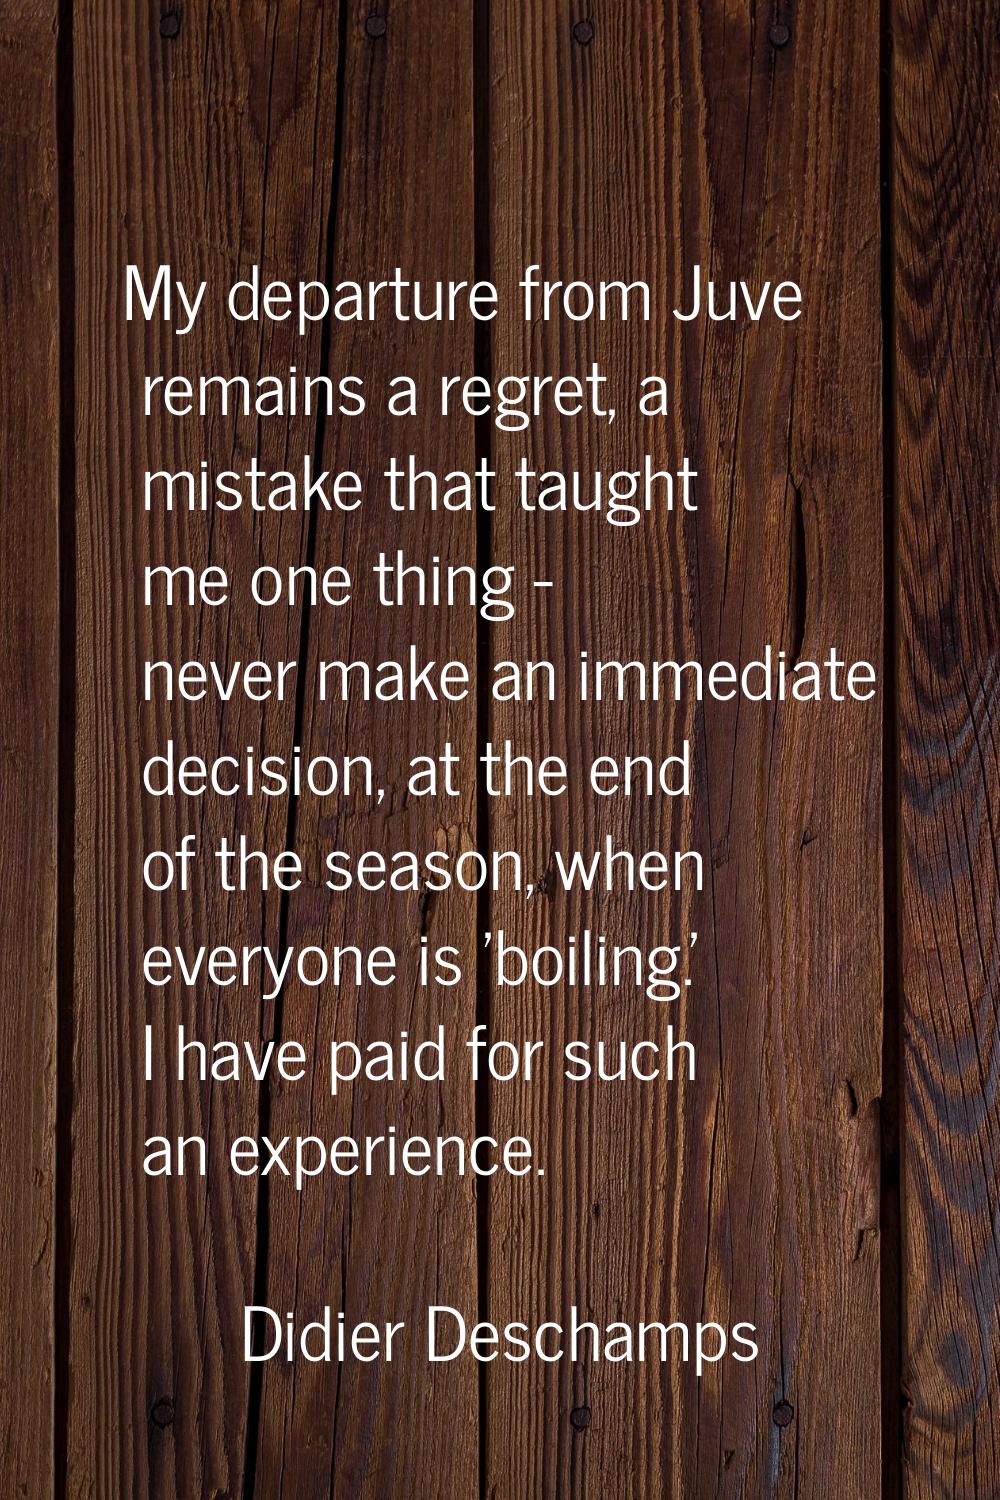 My departure from Juve remains a regret, a mistake that taught me one thing - never make an immedia